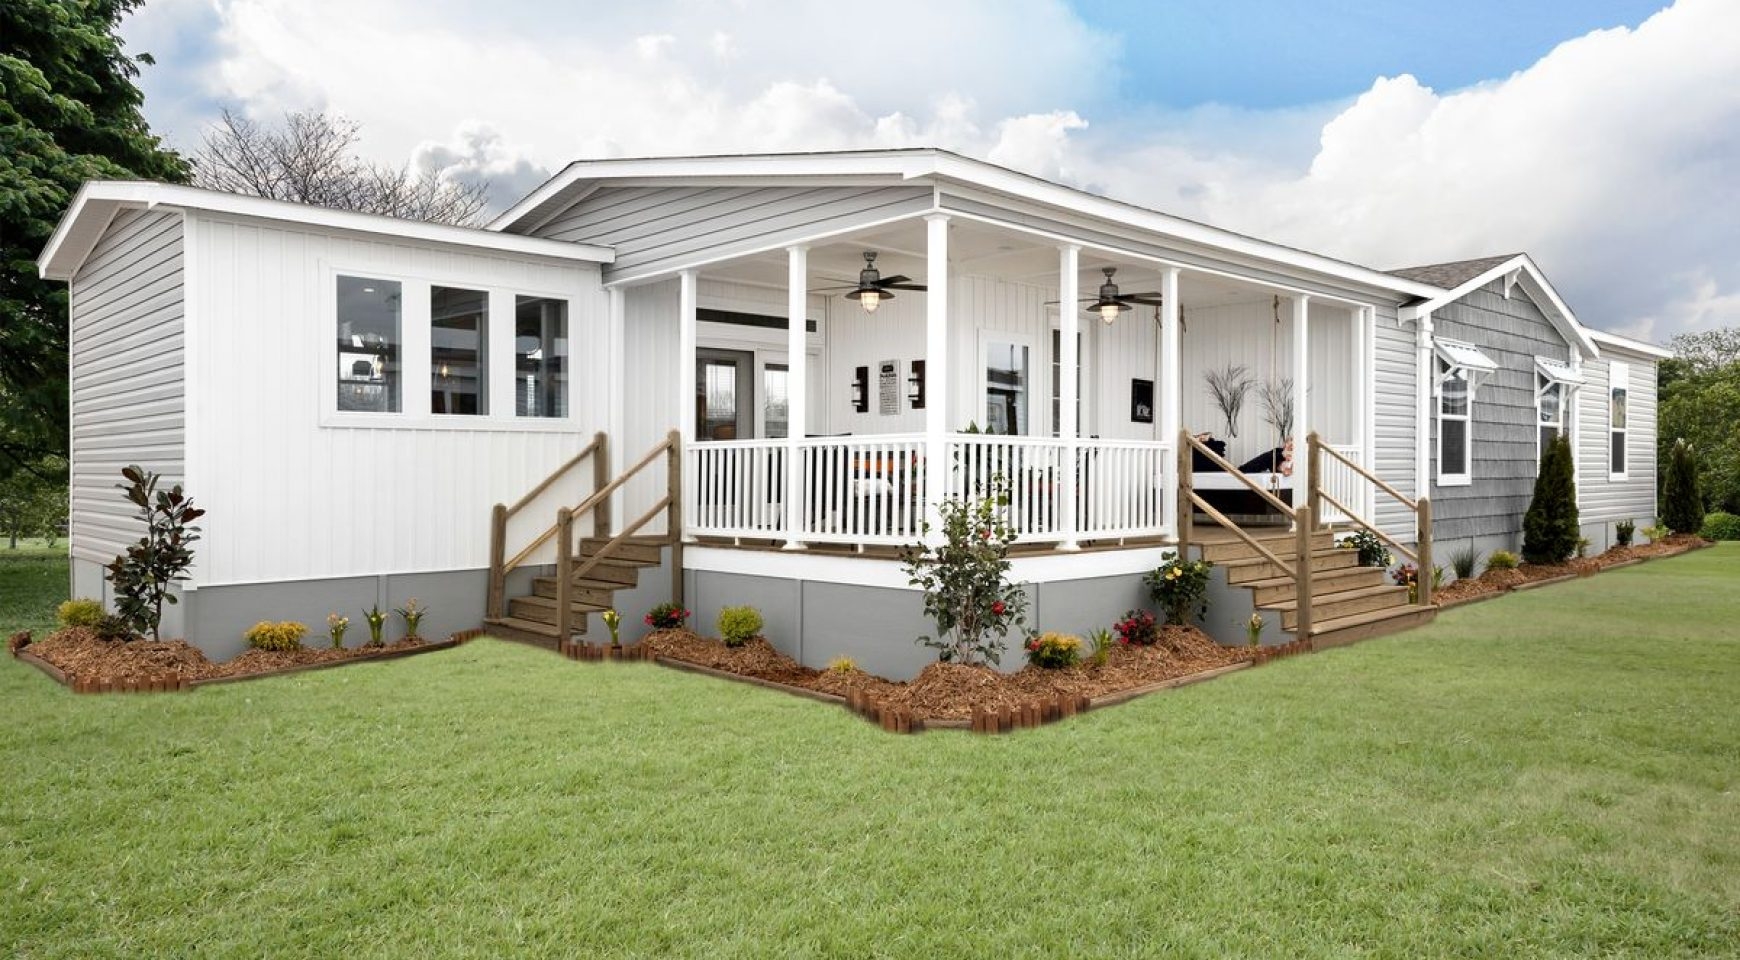 8 Images Pictures Of Double Wide Mobile Homes With Porches And Review